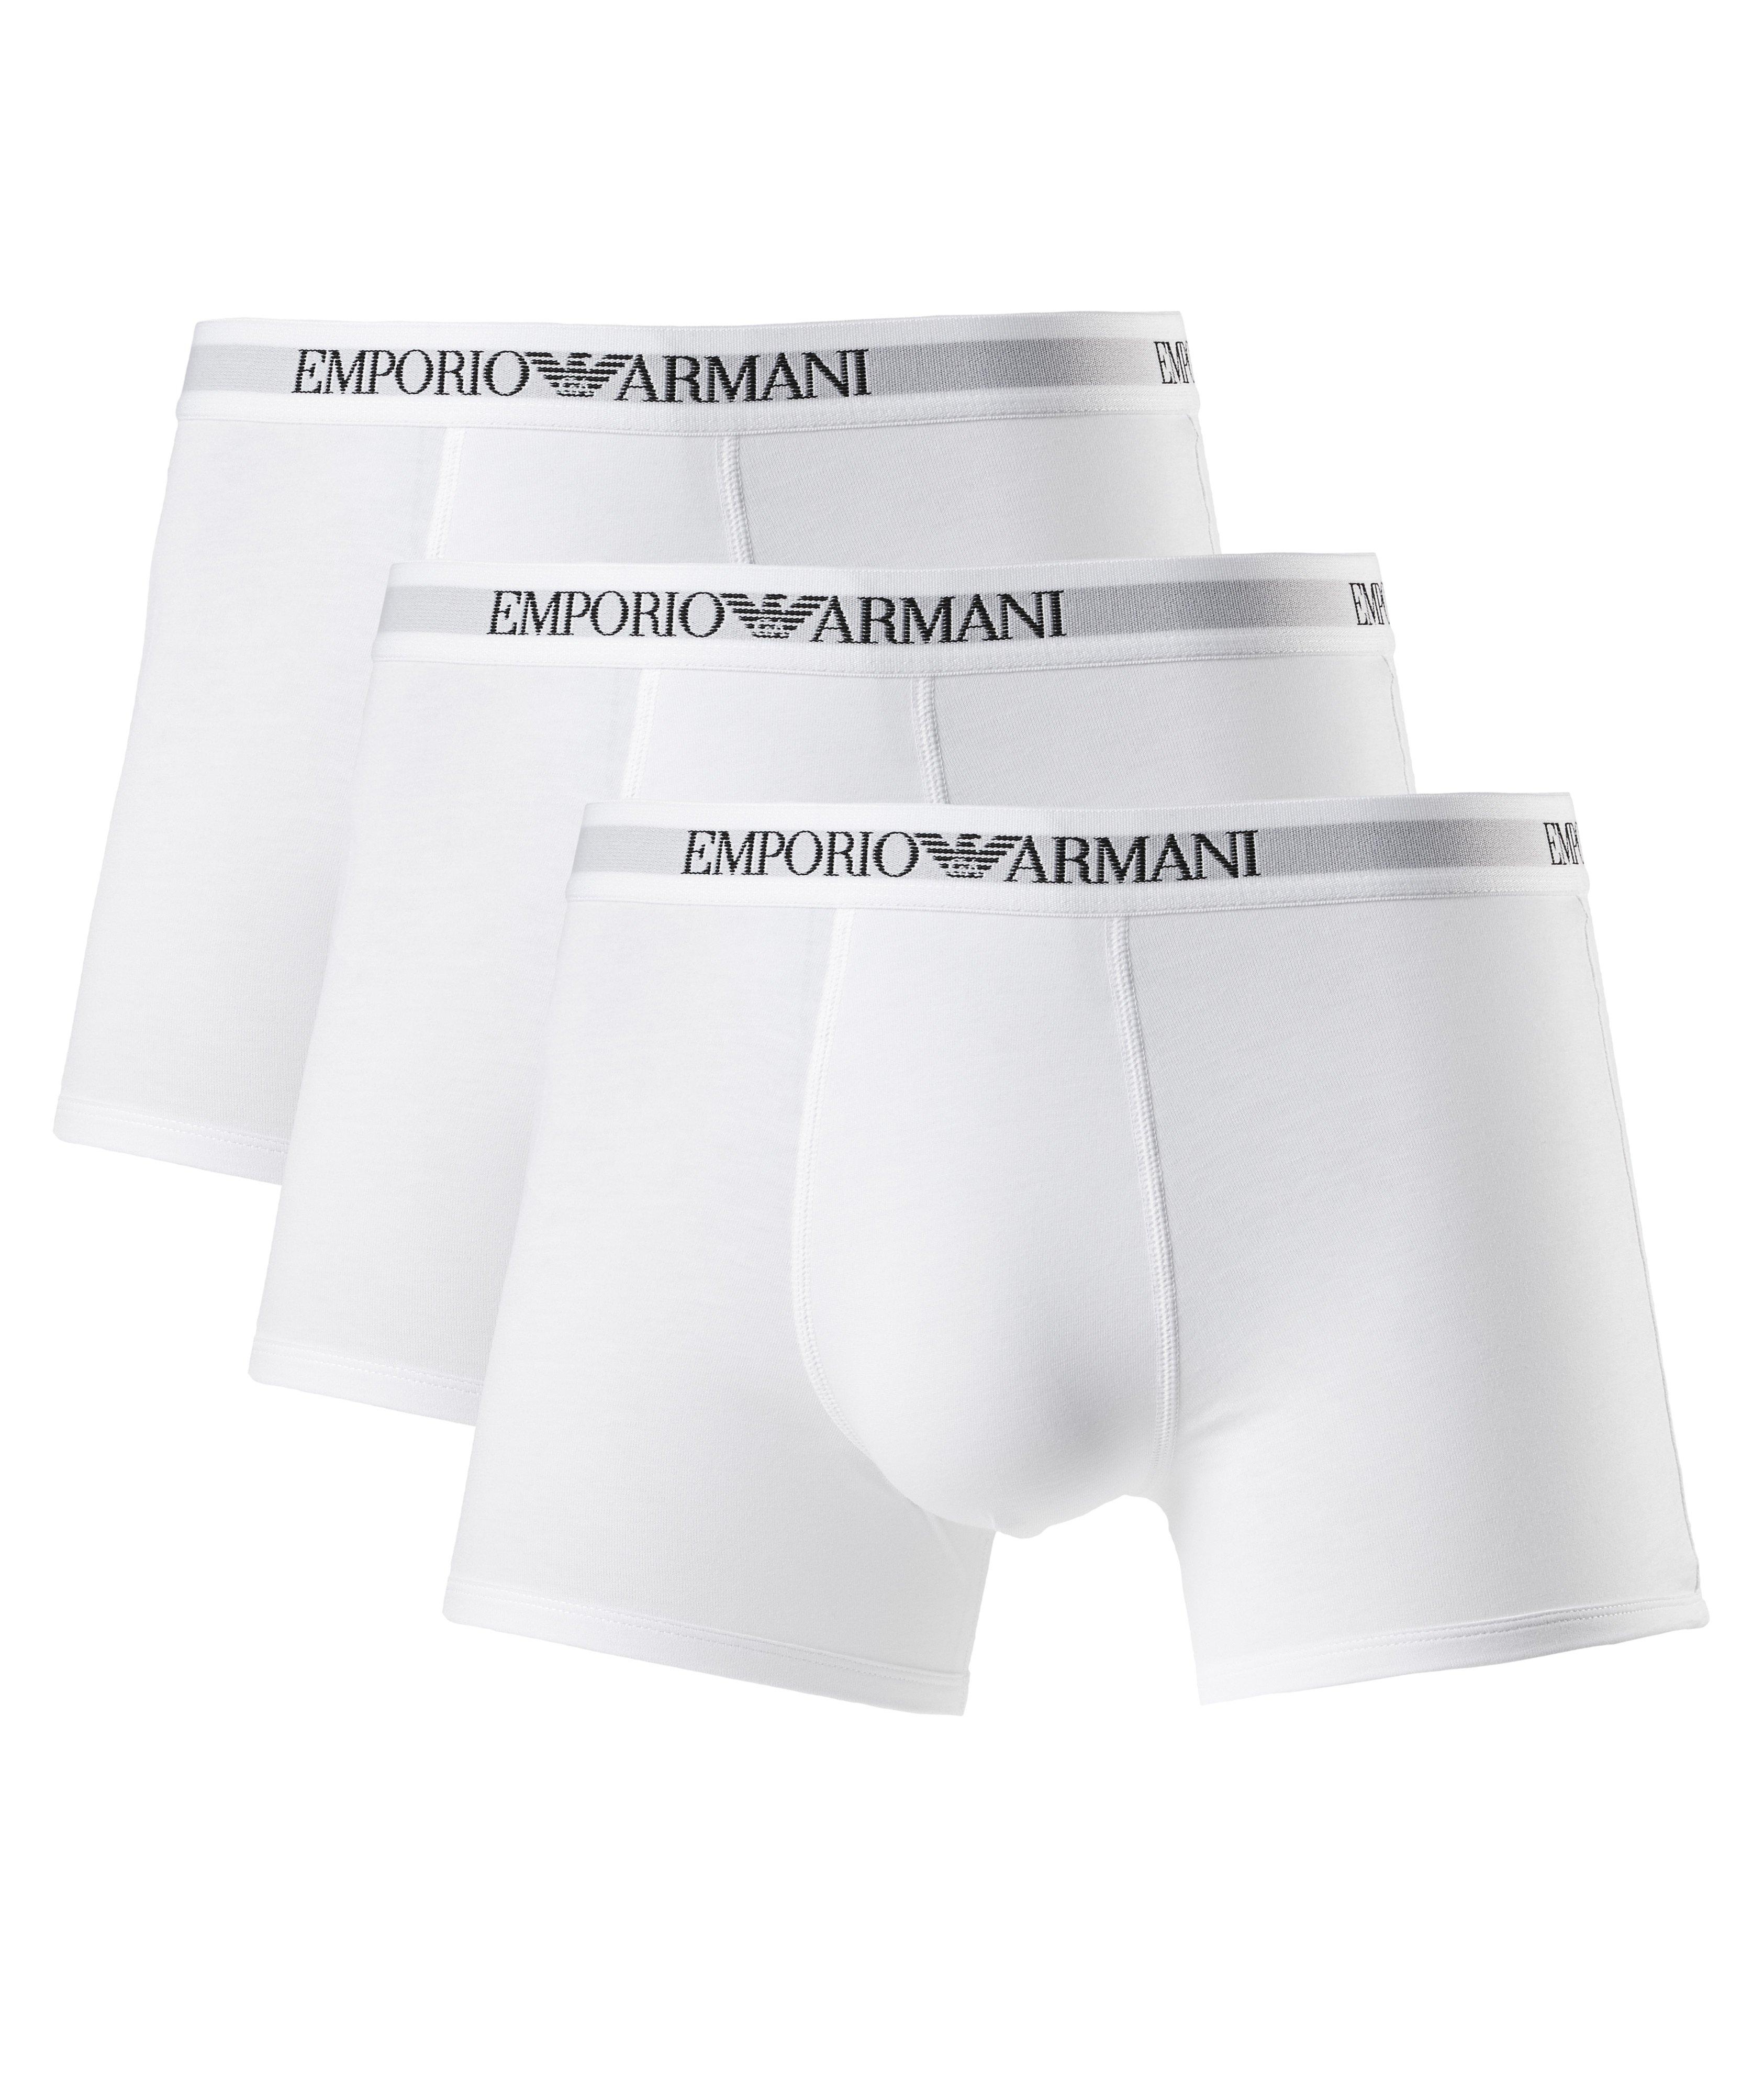 3-Pack Cotton Boxers image 0